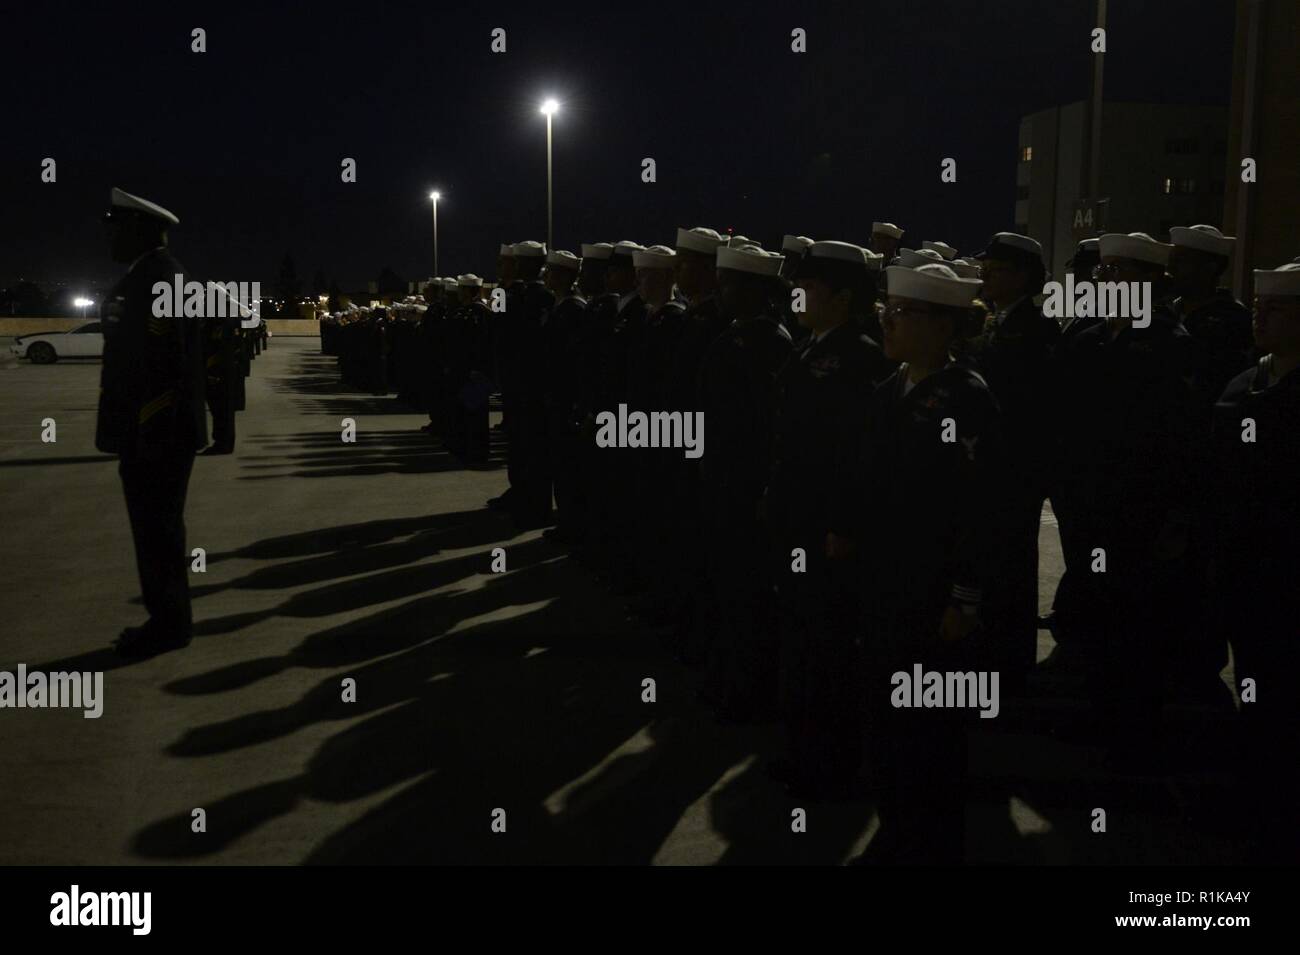 SAN DIEIGO (Oct. 12,2018) — Naval Medical Center San Diego (NMCSD) Directorate for Administration (DFA) Sailors stand in formation for a service dress blue uniform inspection in preparation for the seasonal uniform change. NMCSD is the largest naval hospital on the west coast, employing more than 6,000 Sailors, civilians and contractors. Stock Photo